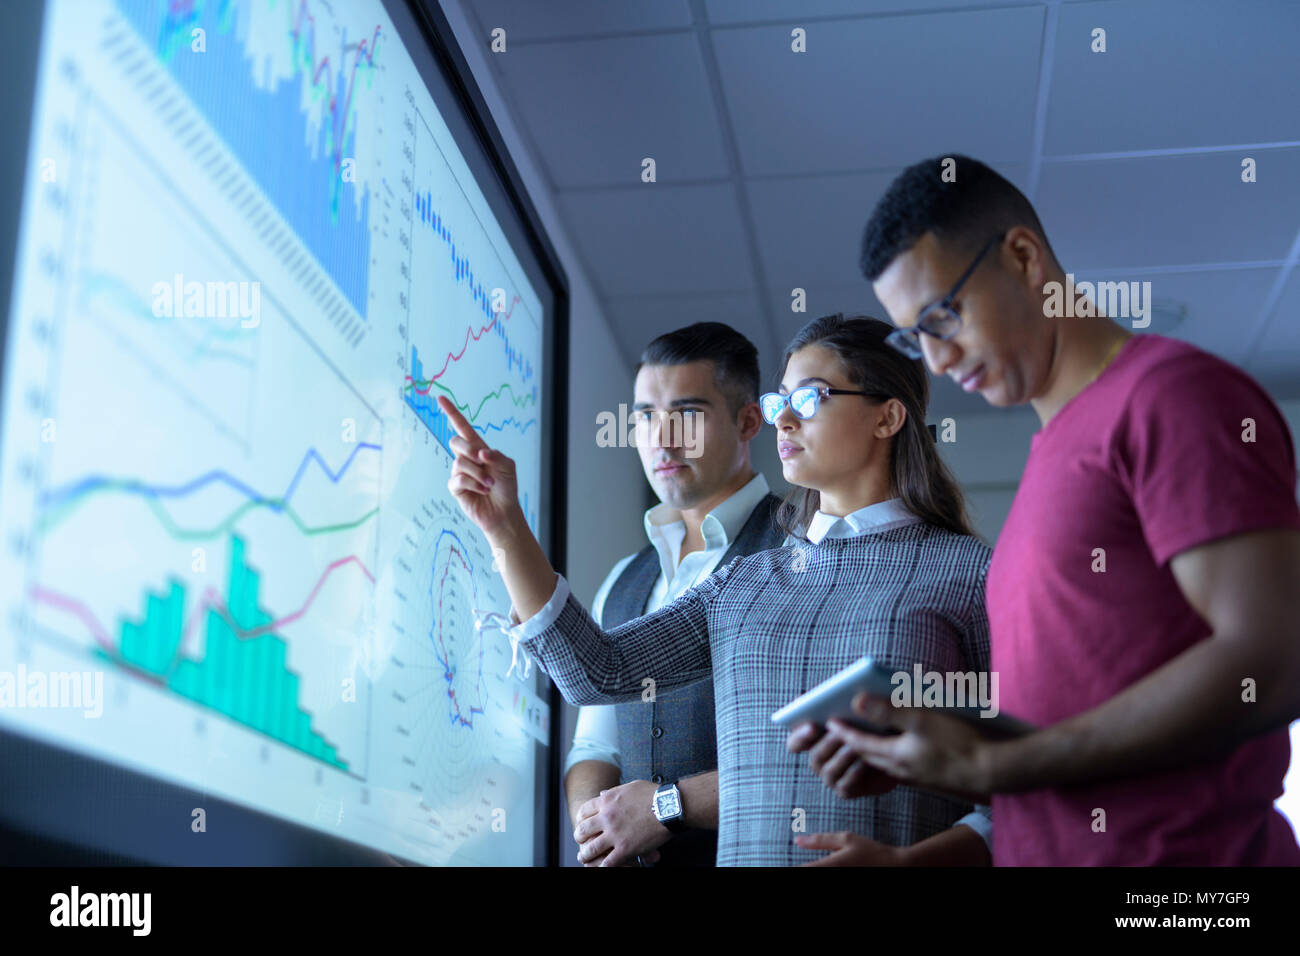 Business team viewing charts and graphs on interactive screen in business meeting Stock Photo